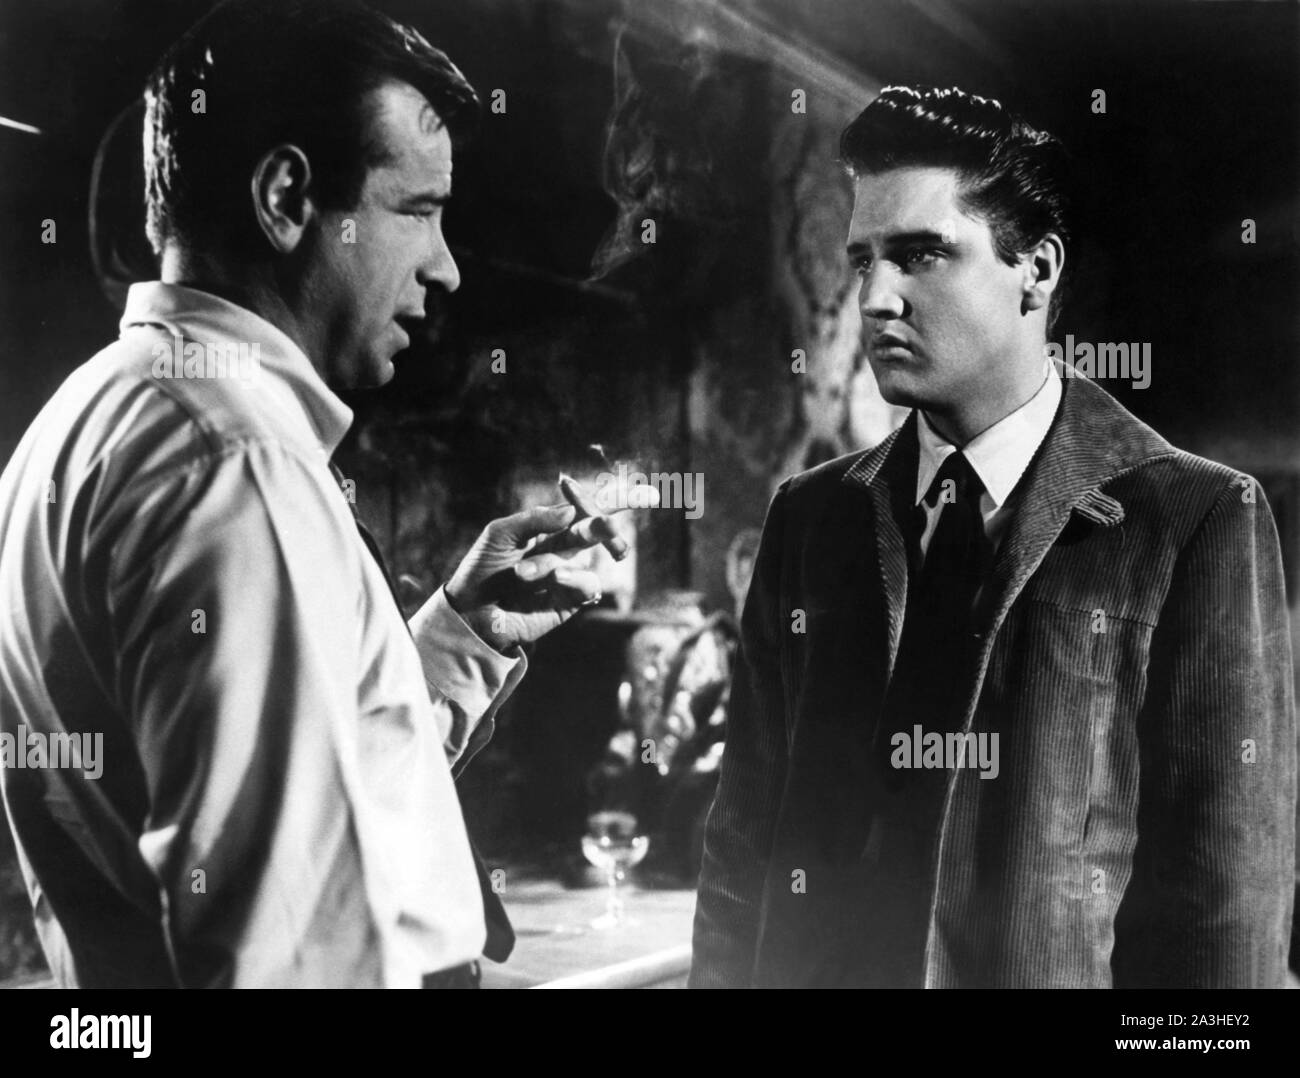 WALTER MATTHAU and ELVIS PRESLEY in KING CREOLE (1958), directed by MICHAEL CURTIZ. Credit: PARAMOUNT PICTURES / Album Stock Photo